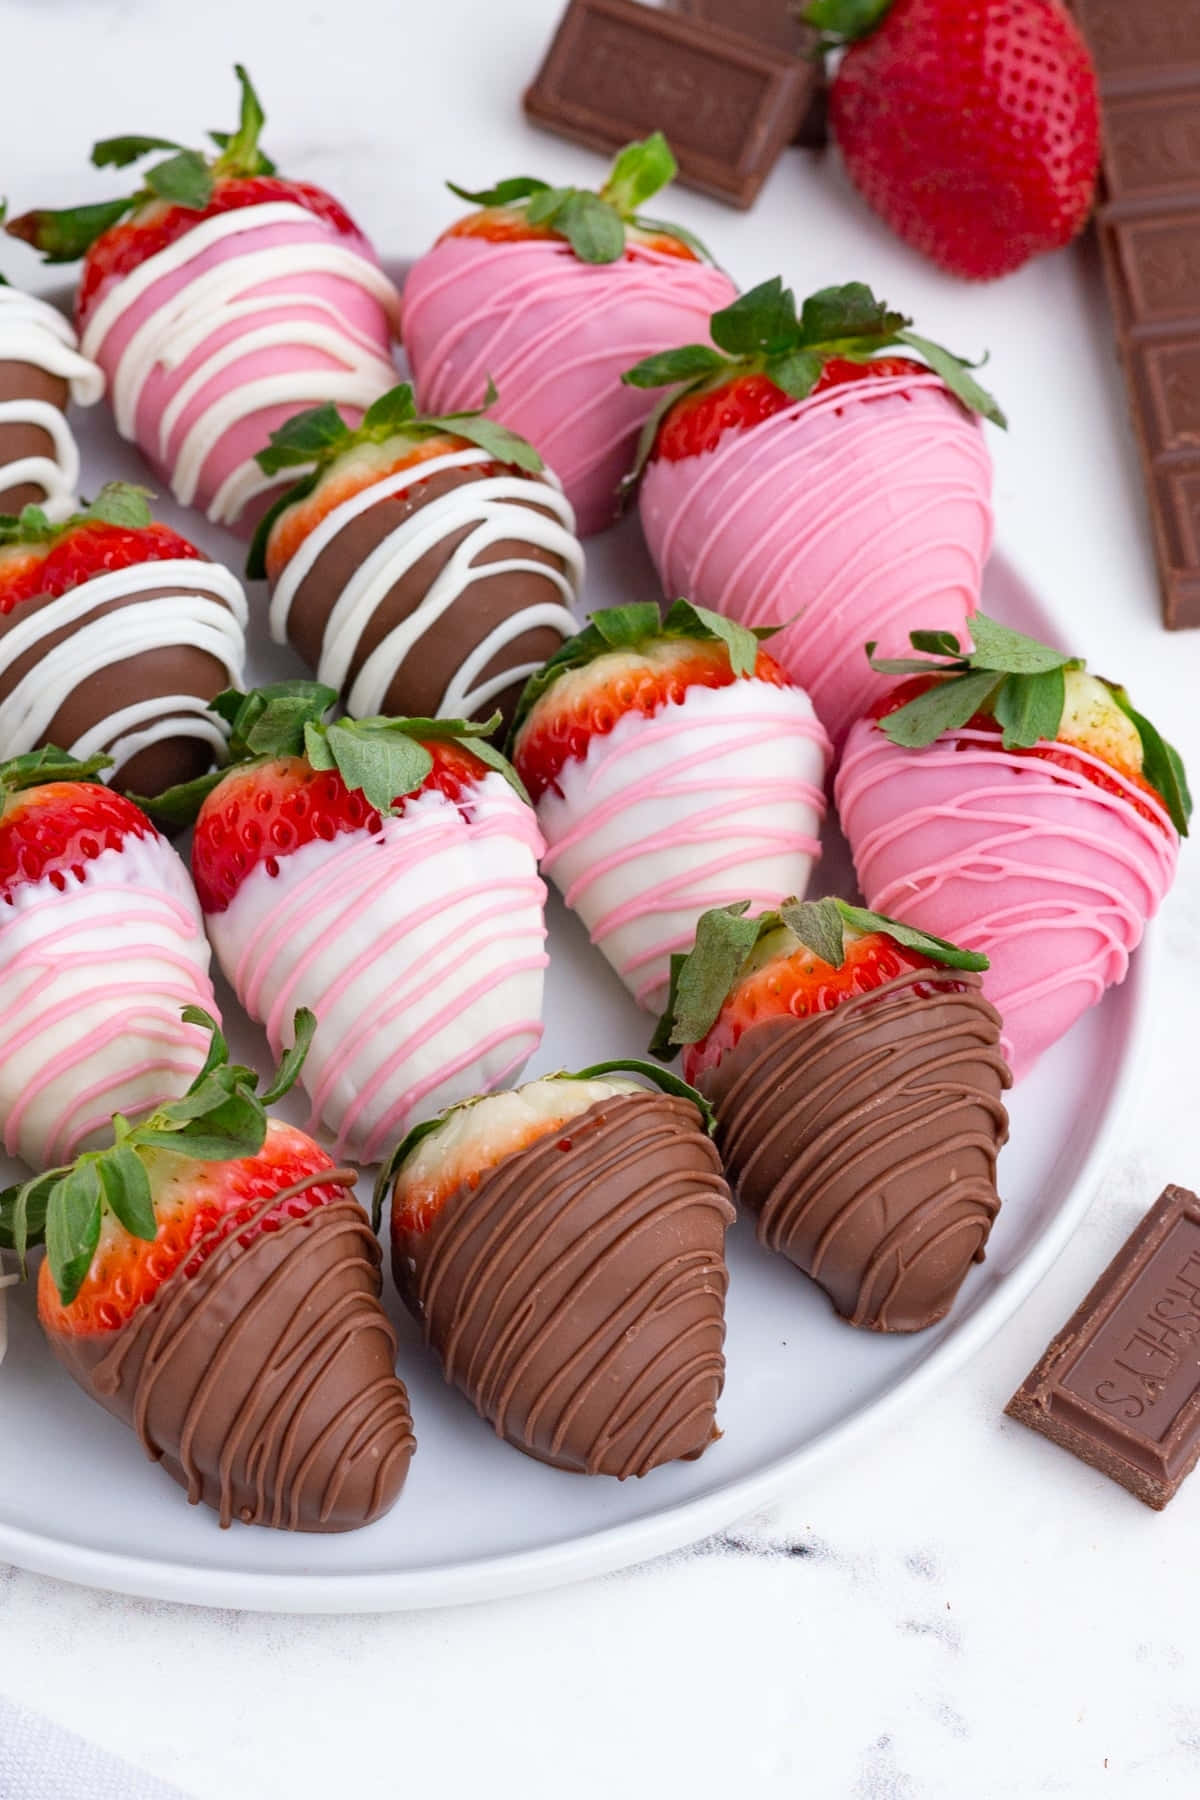 Chocolate Covered Strawberries Delicious Treats.jpg Wallpaper